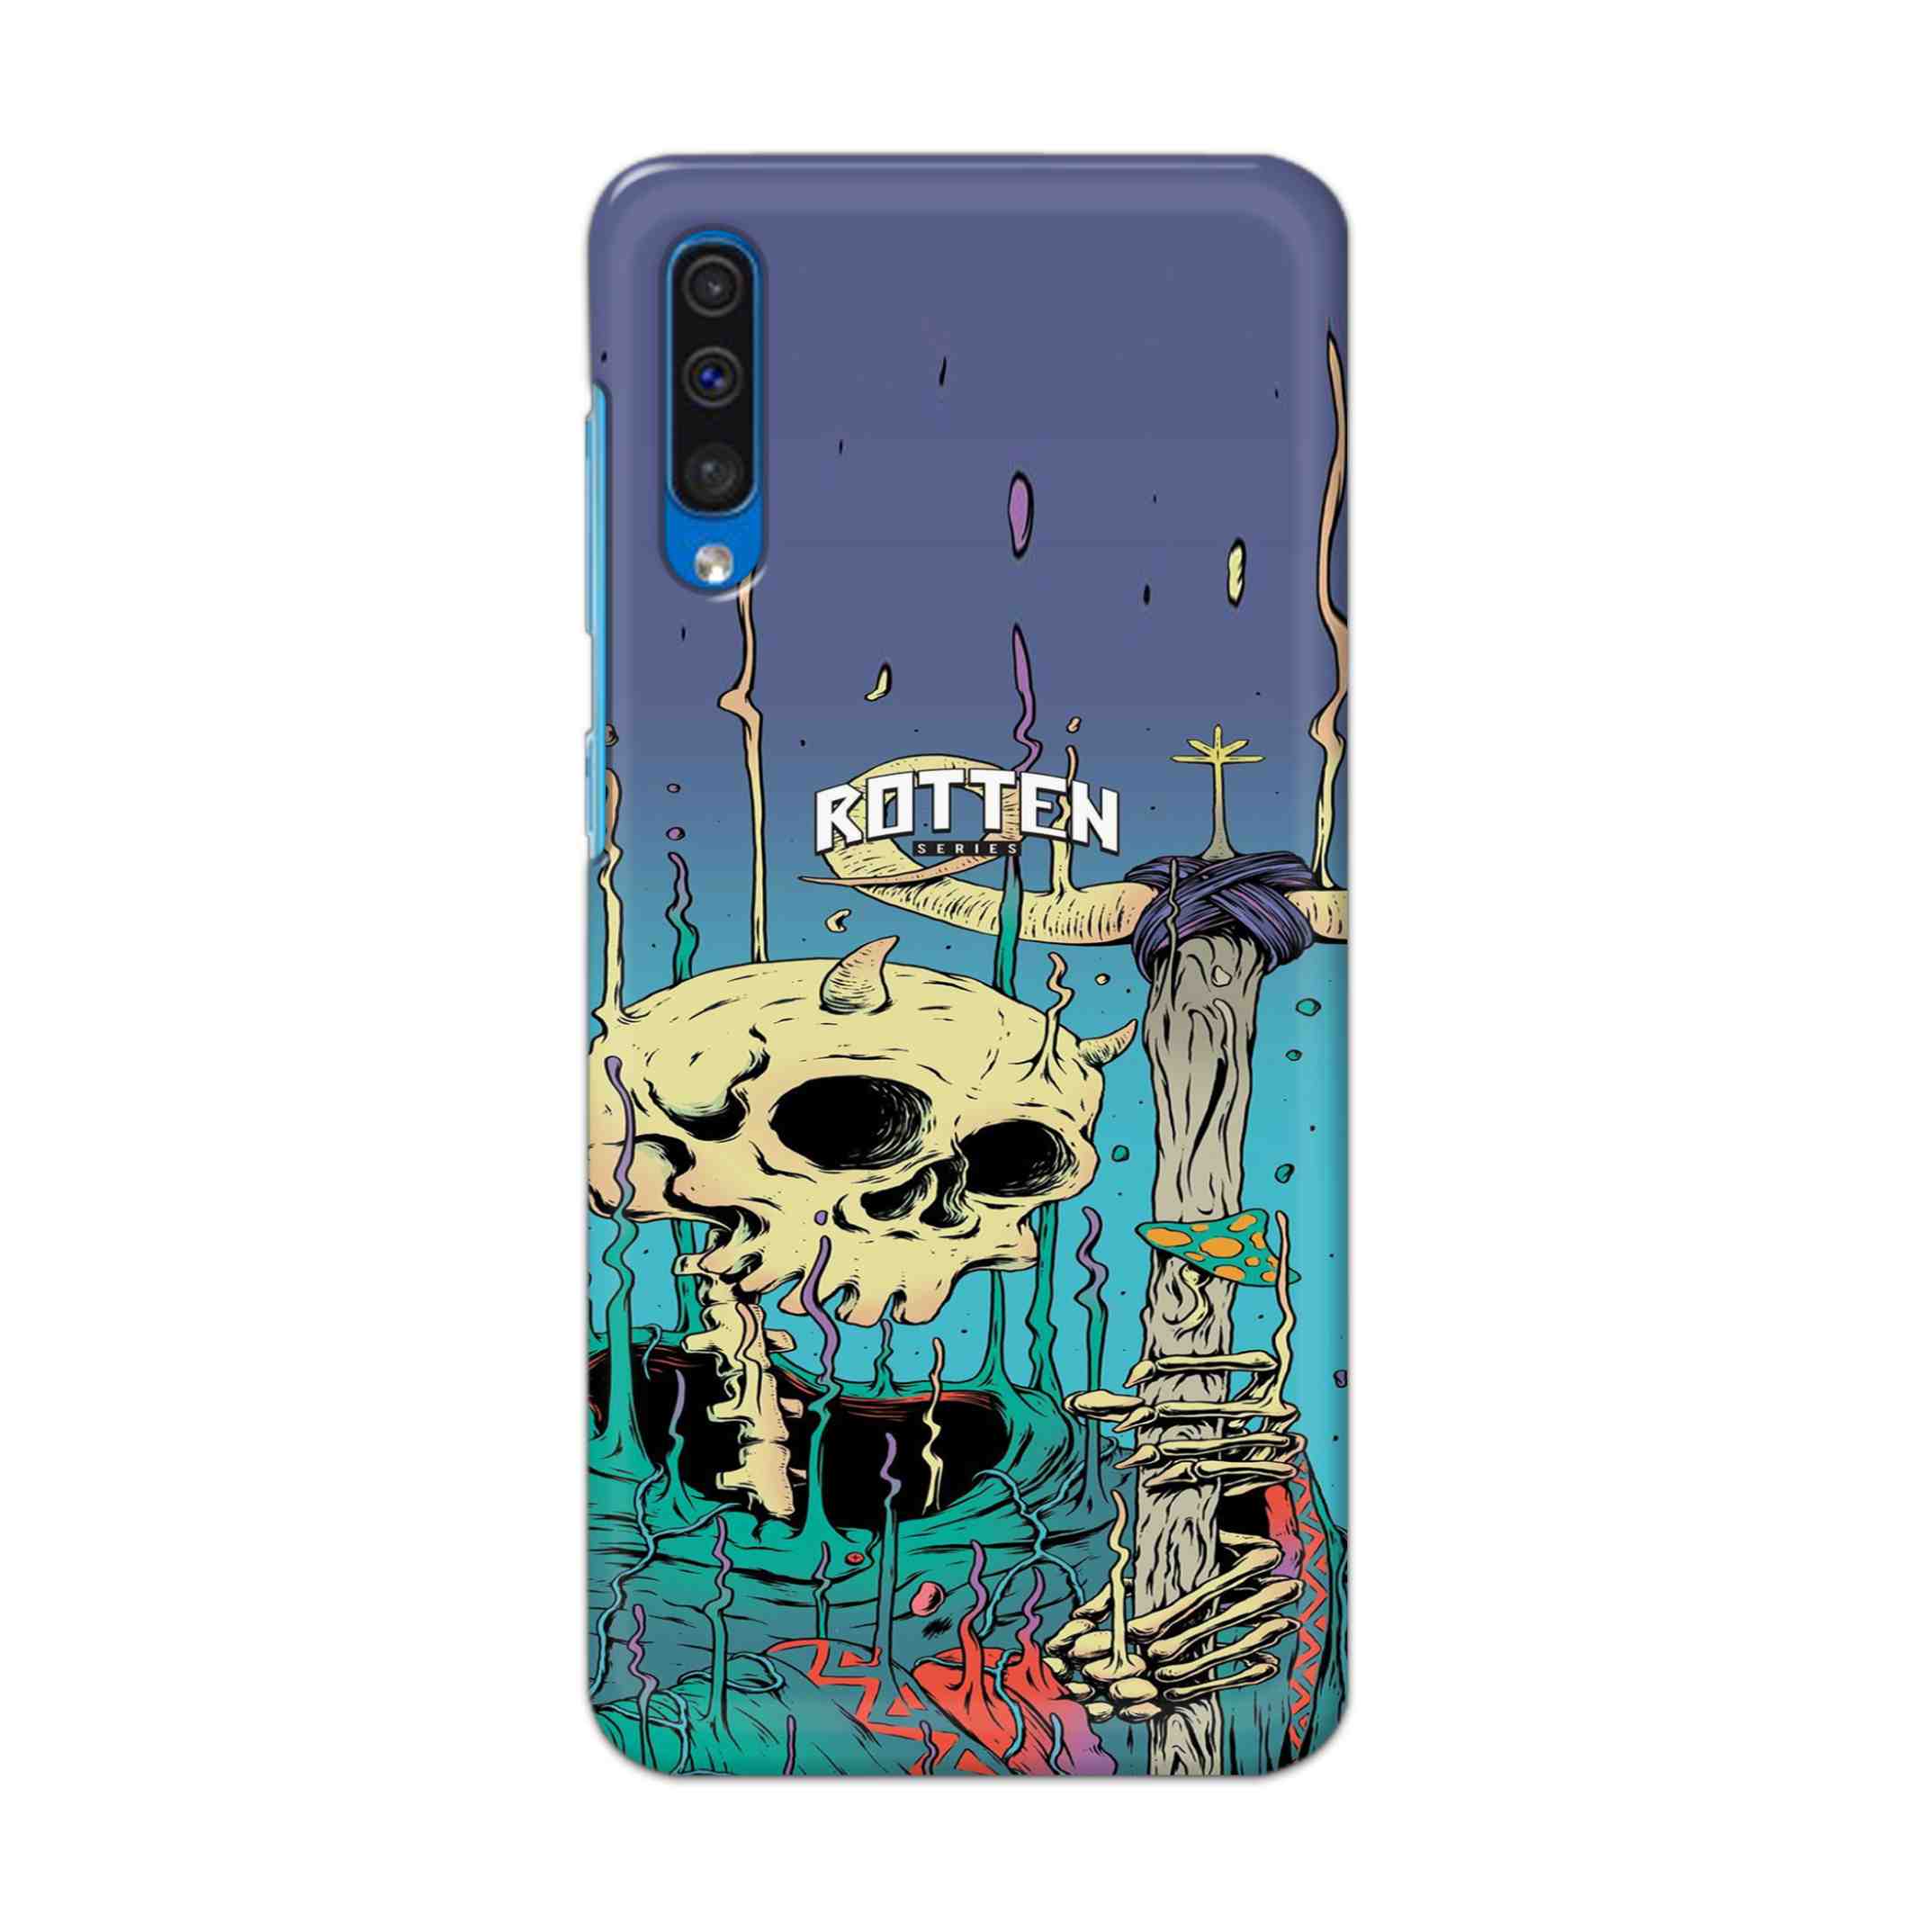 Buy Skull Hard Back Mobile Phone Case Cover For Samsung Galaxy A50 / A50s / A30s Online